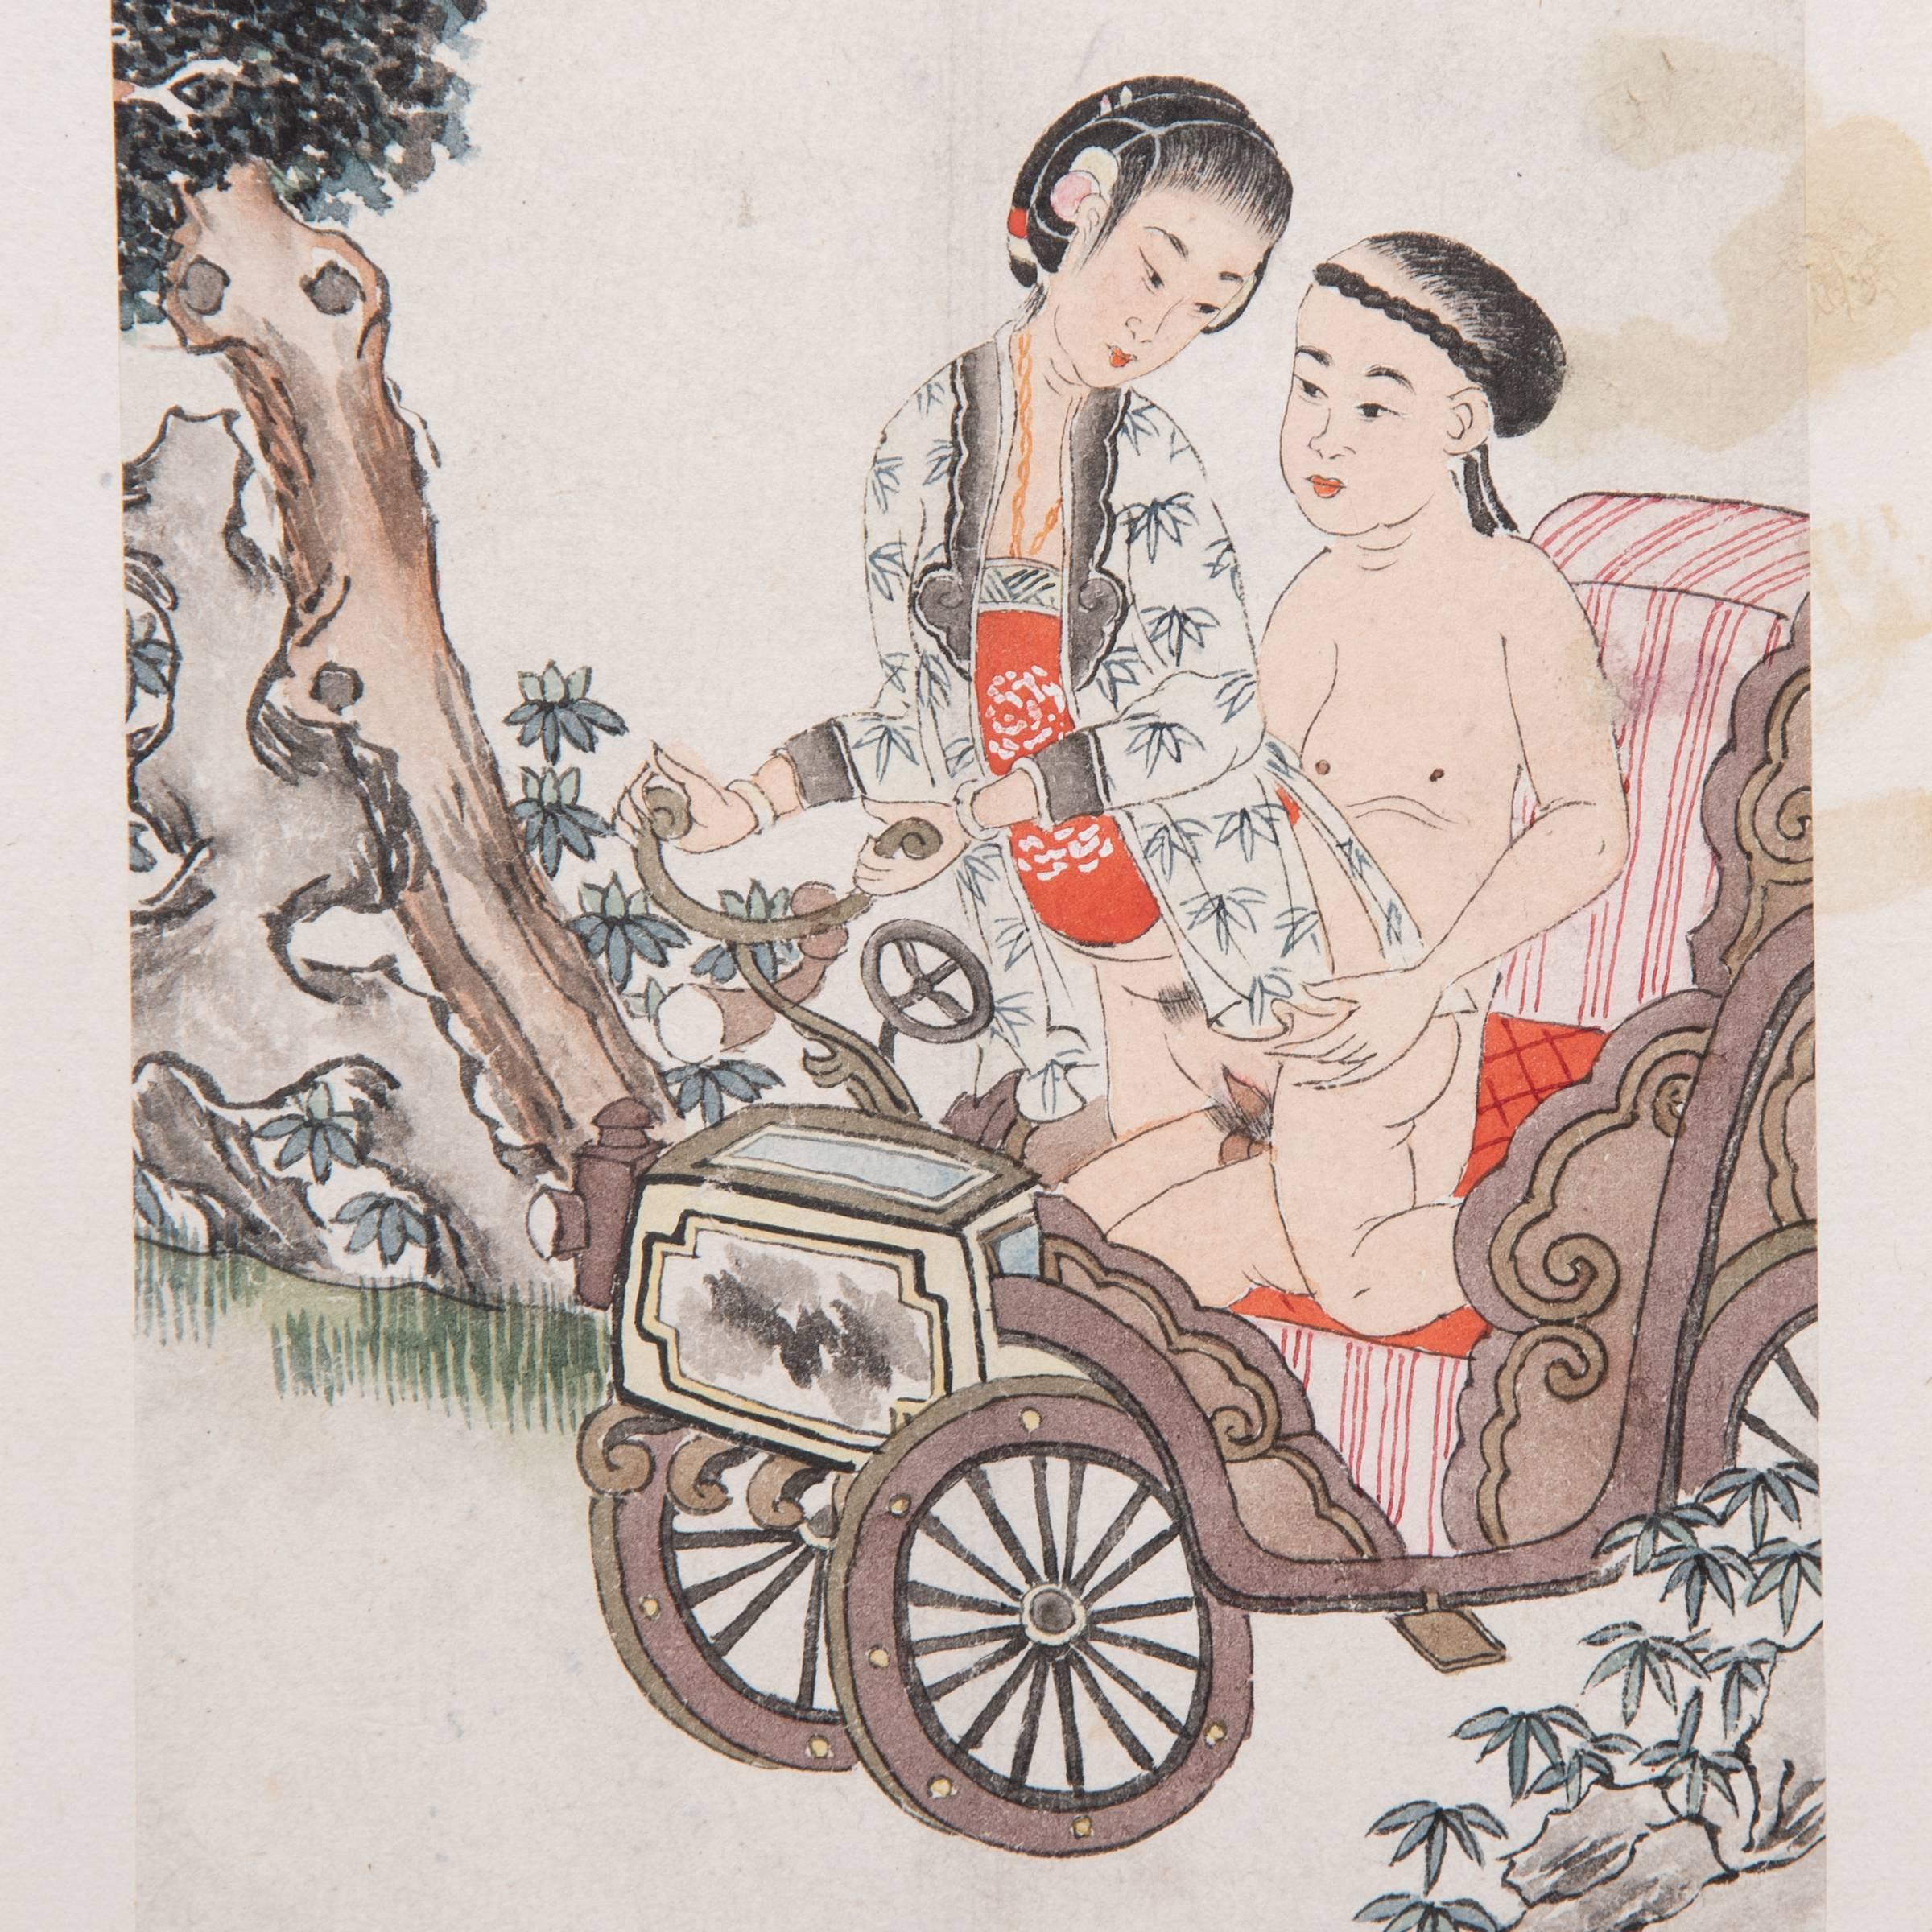 Despite its explicit content, this intimate scene conveys a sense of tenderness and romantic love characteristic of Chinese erotic art. Known as “spring palace paintings,” these ink and watercolor illustrations imagined the sensual delights of